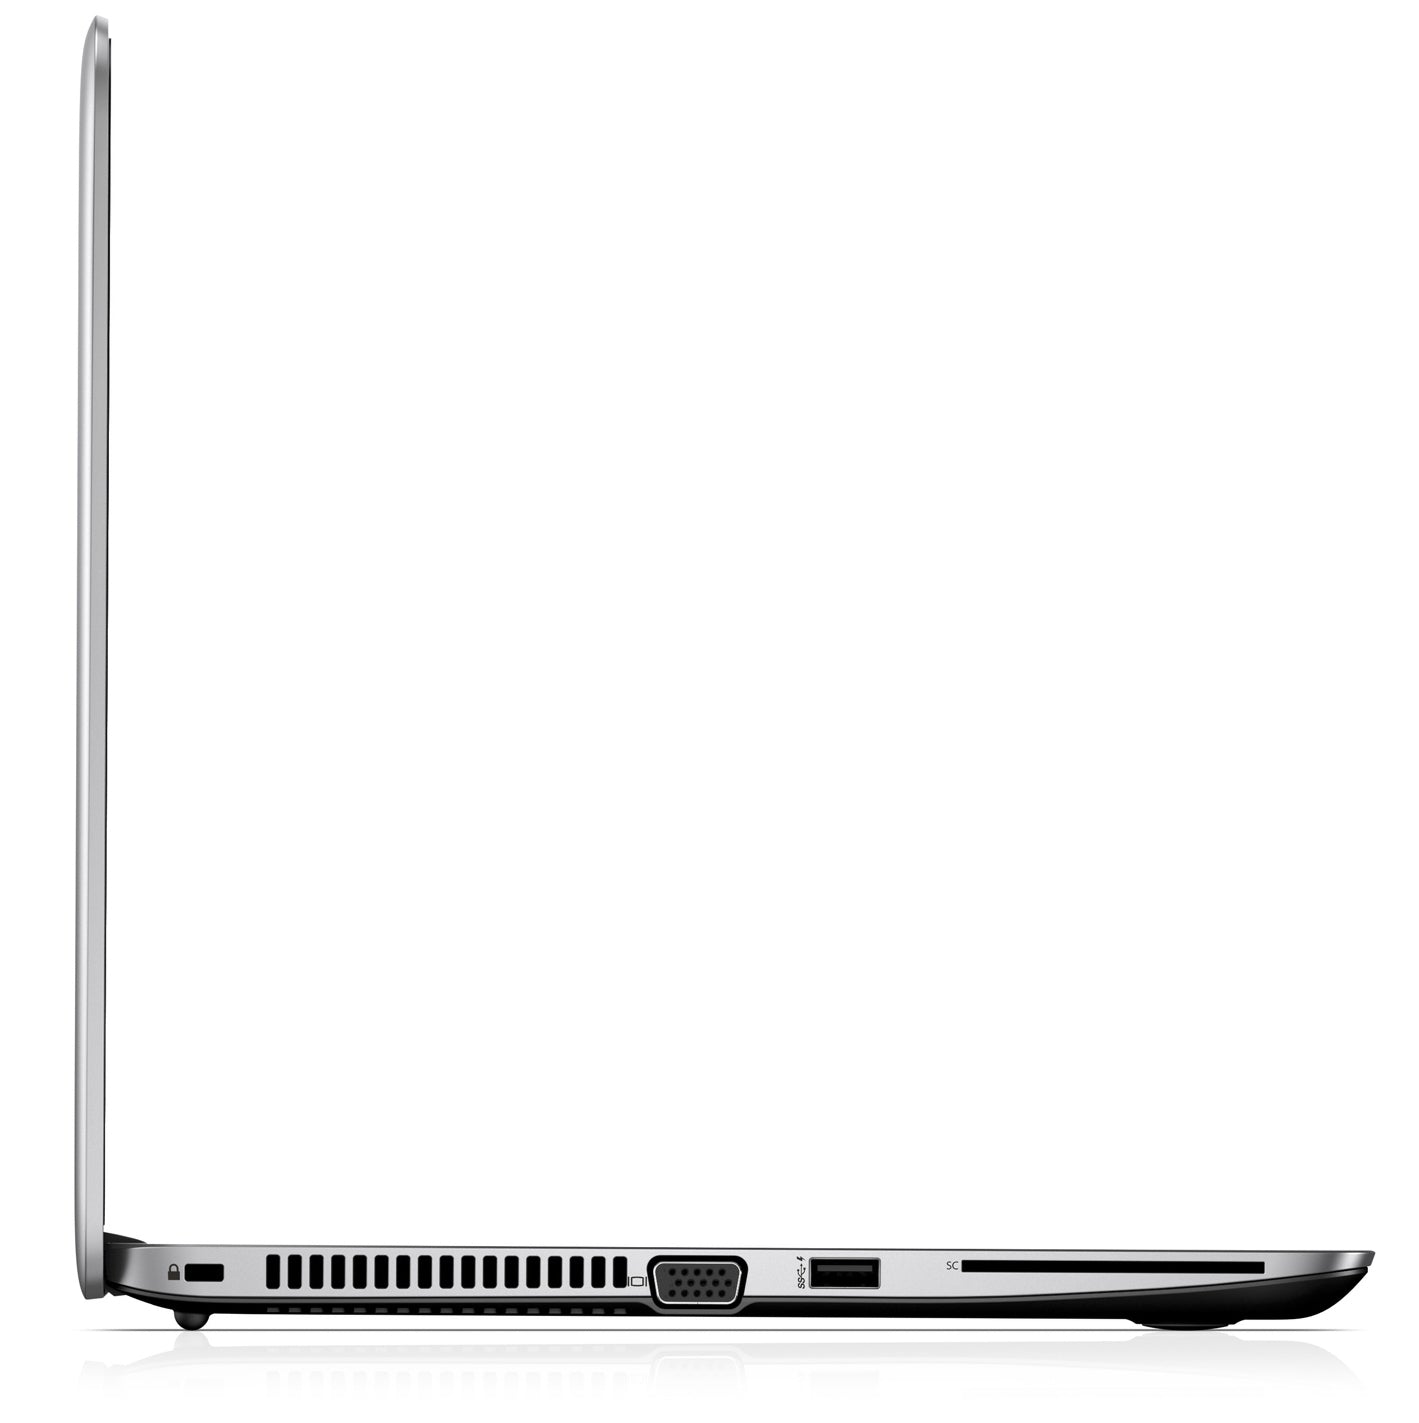 hp elitebook mt43 14" laptop- 2.4ghz quad core amd a8, 8gb-32gb ram, hard drive or solid state drive, win 10 pro by computers 4 less